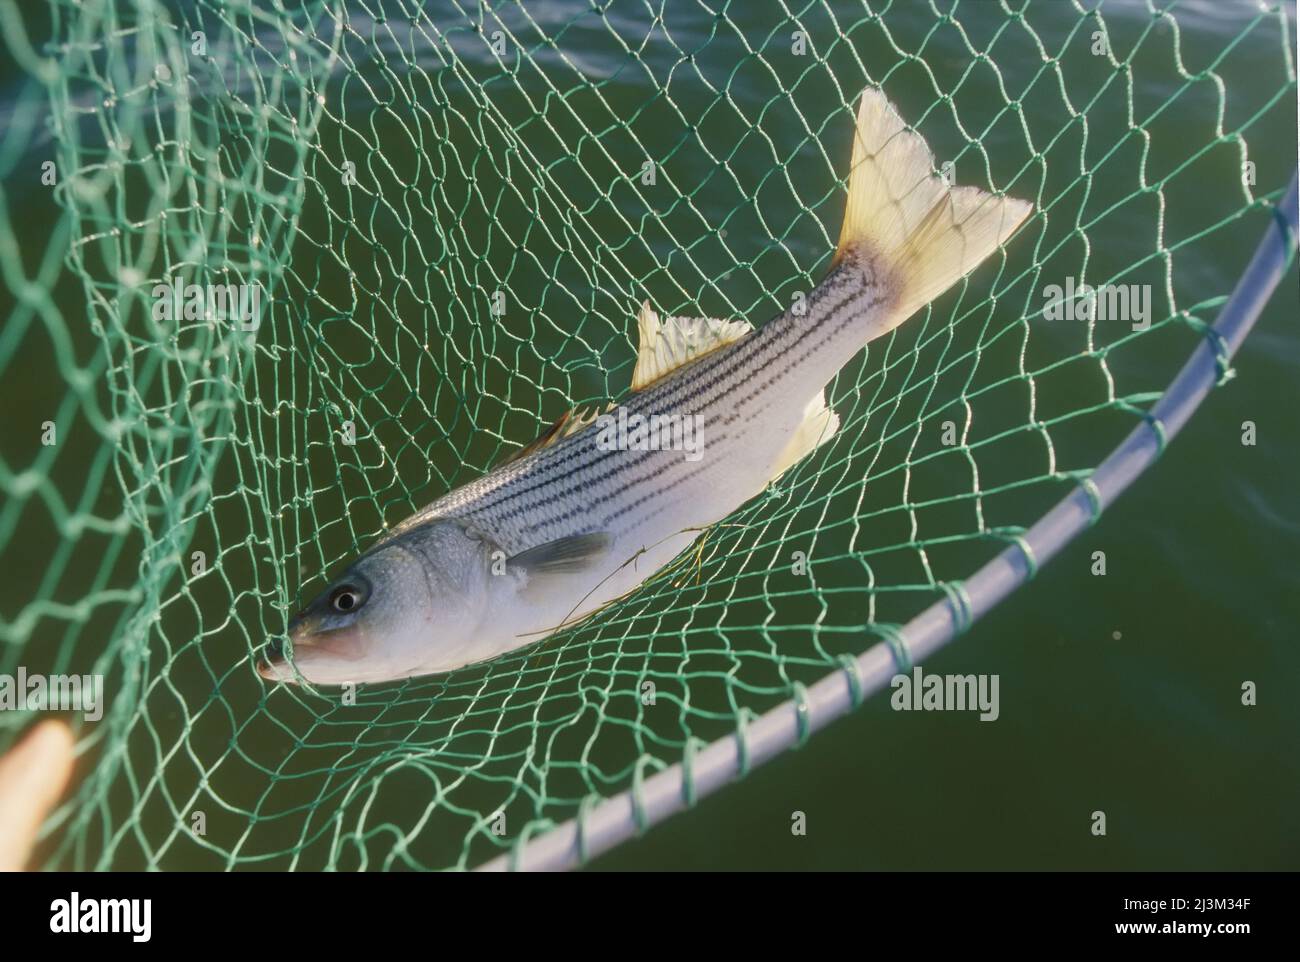 Striped bass in net. The fish is also known as rockfish